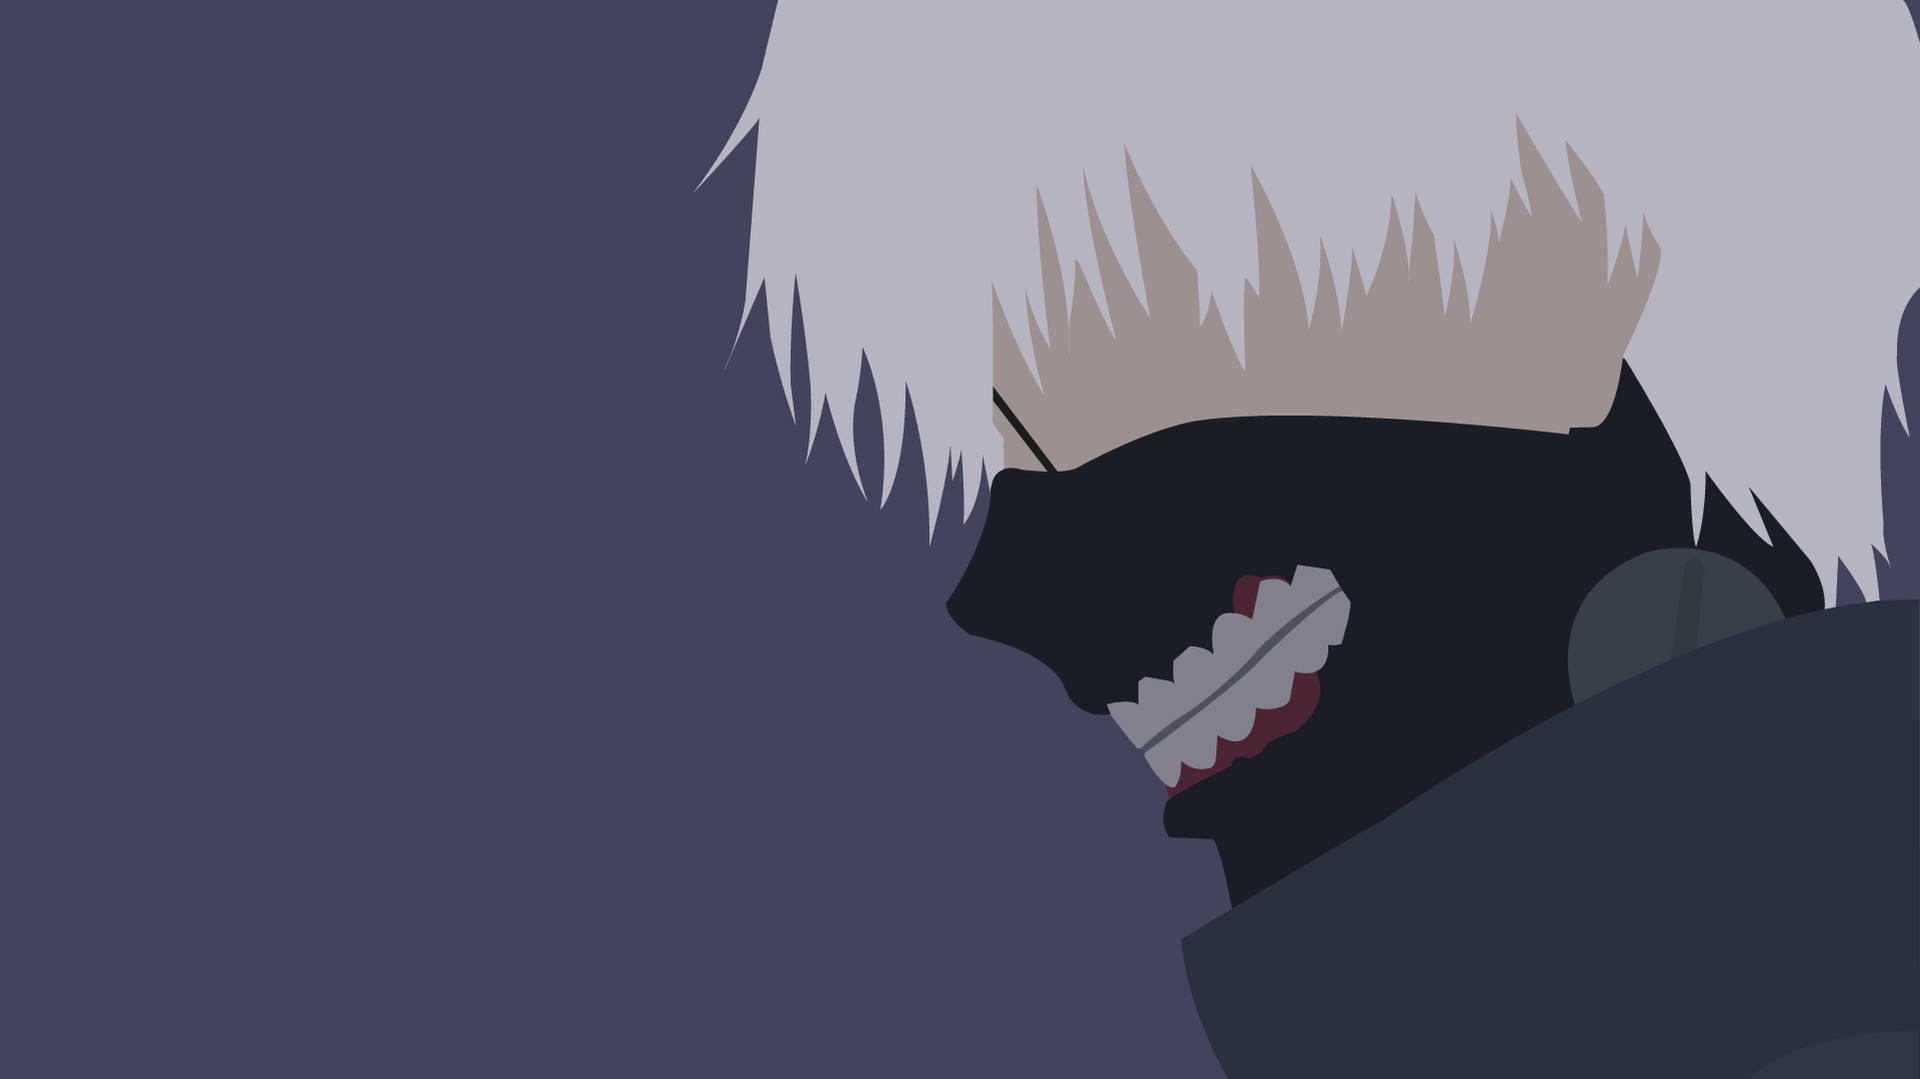 Image  "Tokyo Ghoul Aesthetic - A Dark, Unnerving Setting" Wallpaper